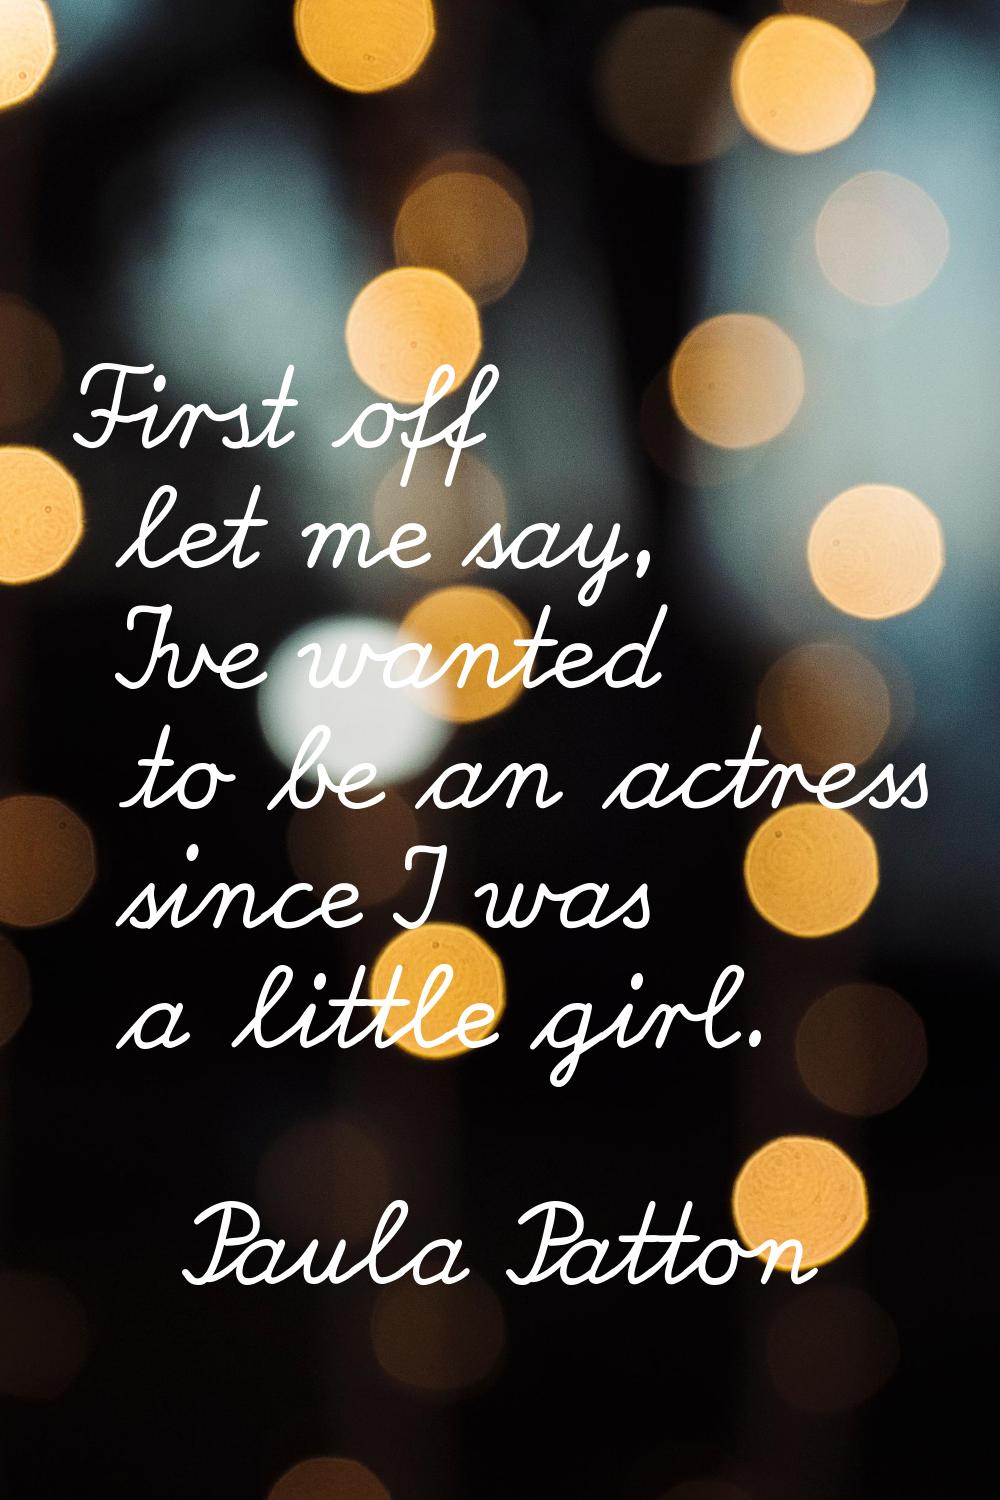 First off let me say, I've wanted to be an actress since I was a little girl.